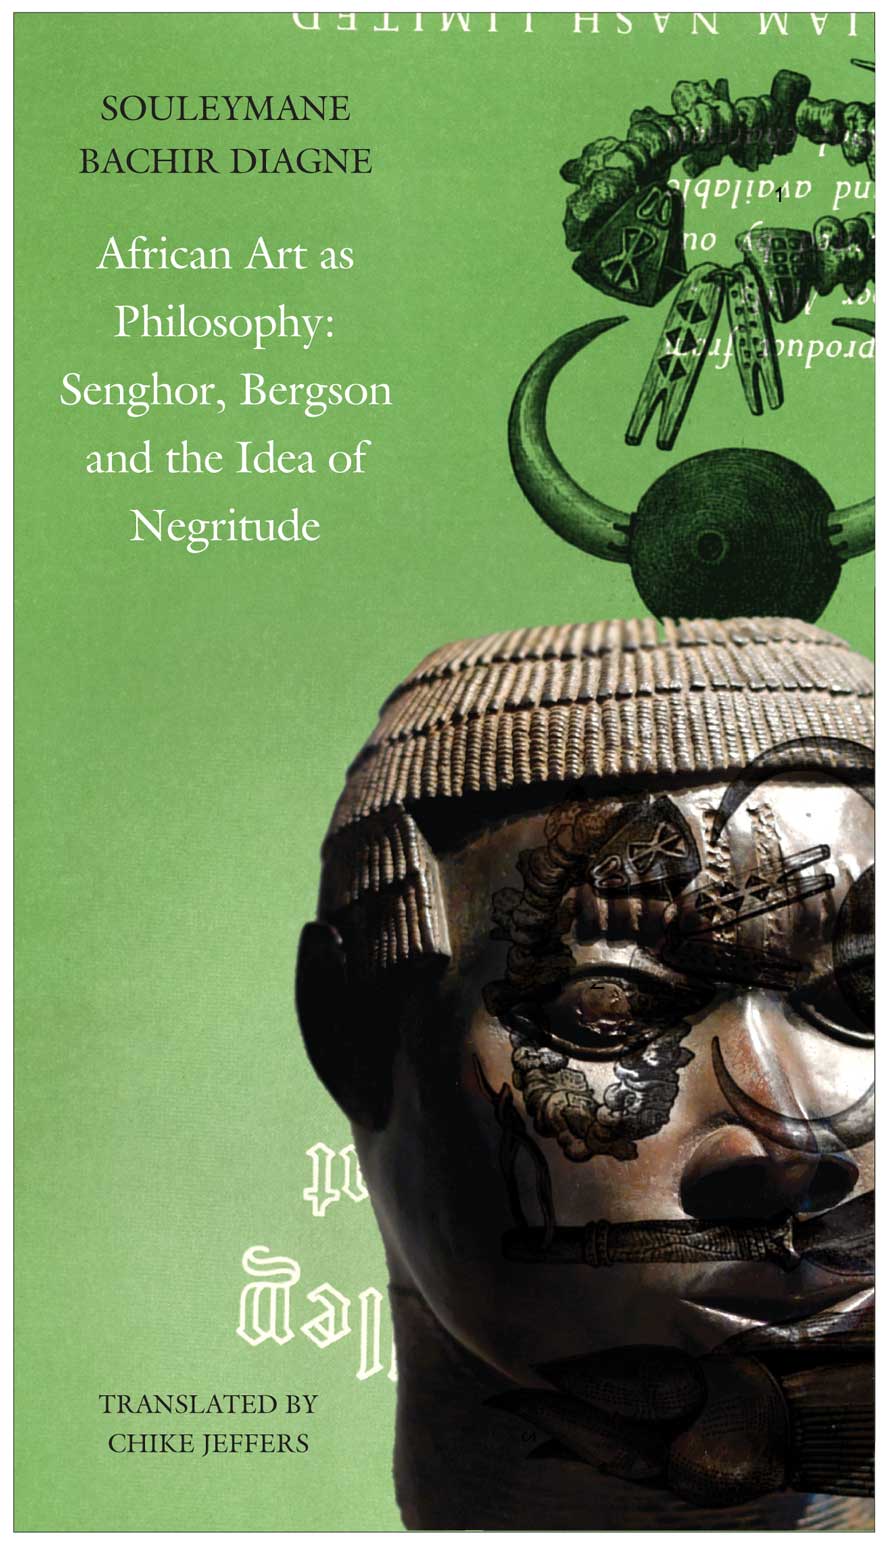 African Art as Philosophy: Senghor, Bergson and the Idea of Negritude by Souleymane Bachir Diagne | Seagull Books